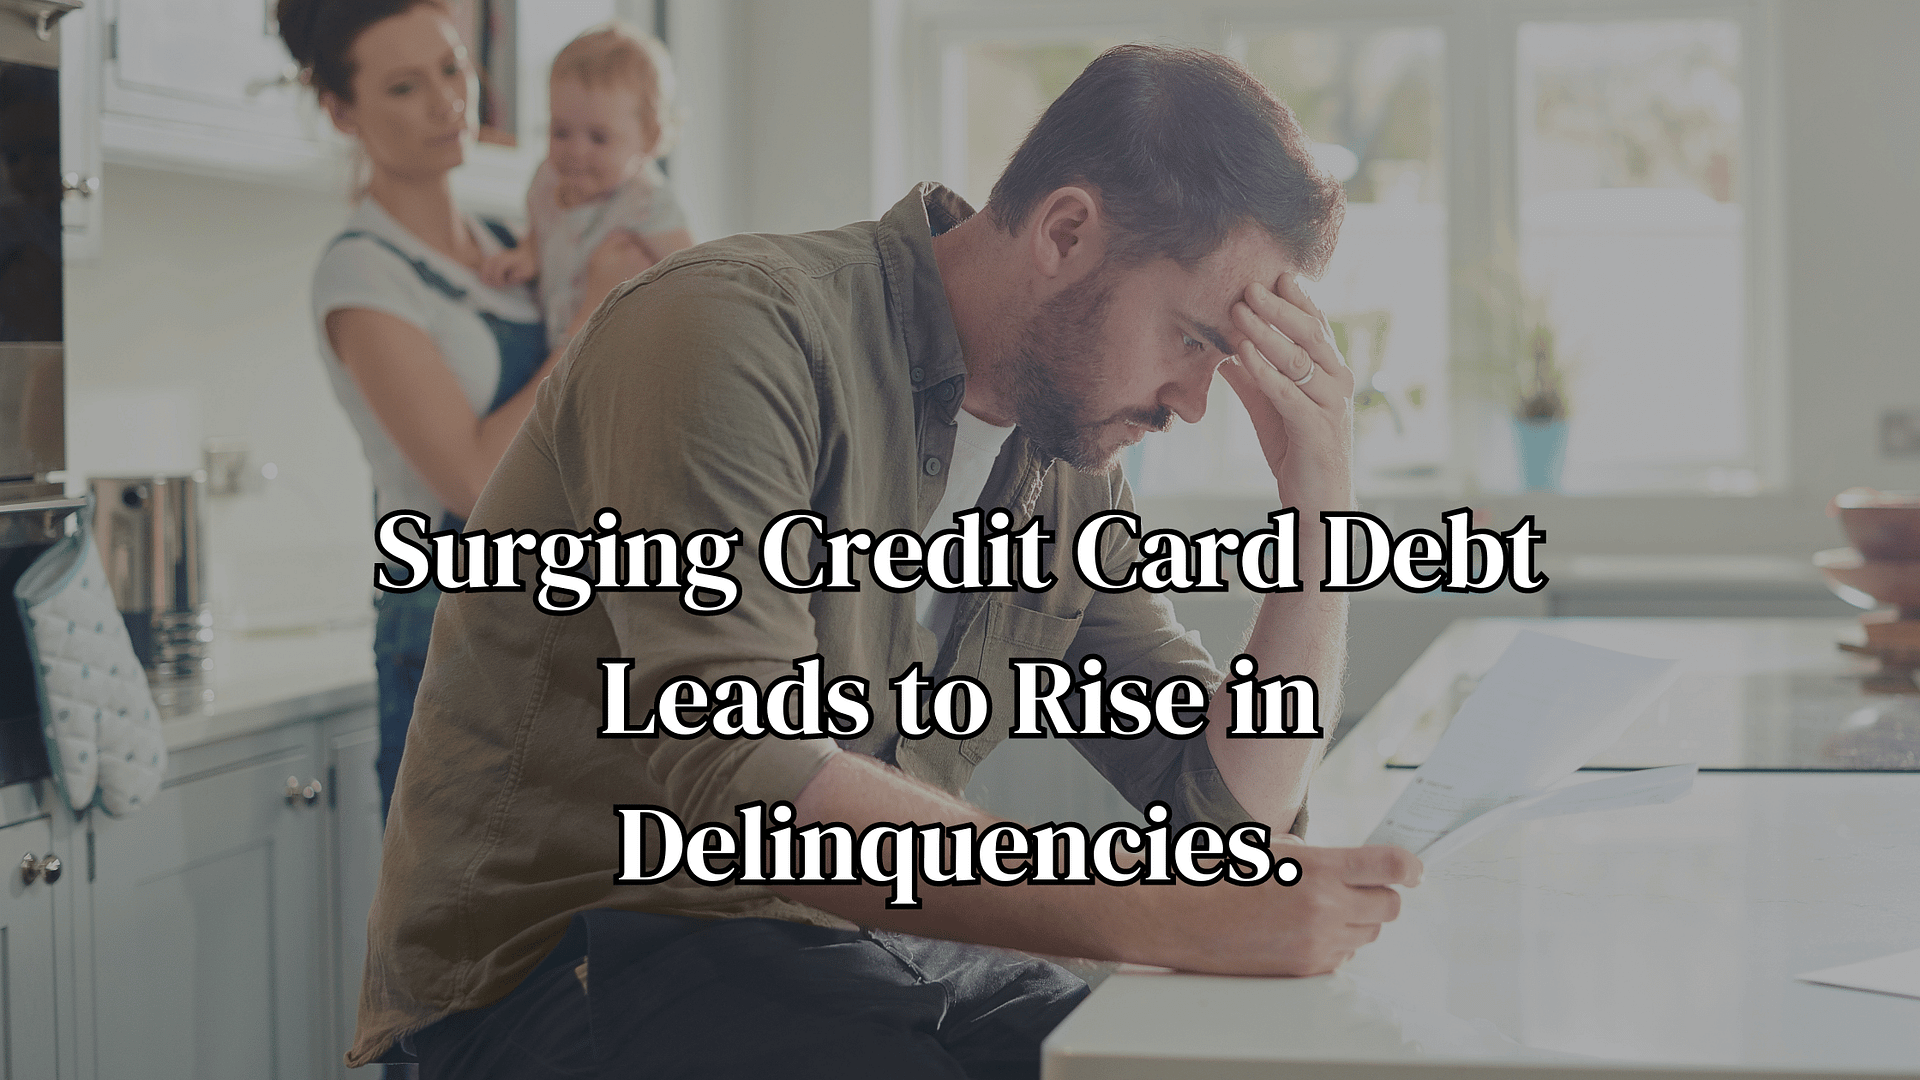 Surging Credit Card Debt Leads to Rise in Delinquencies.